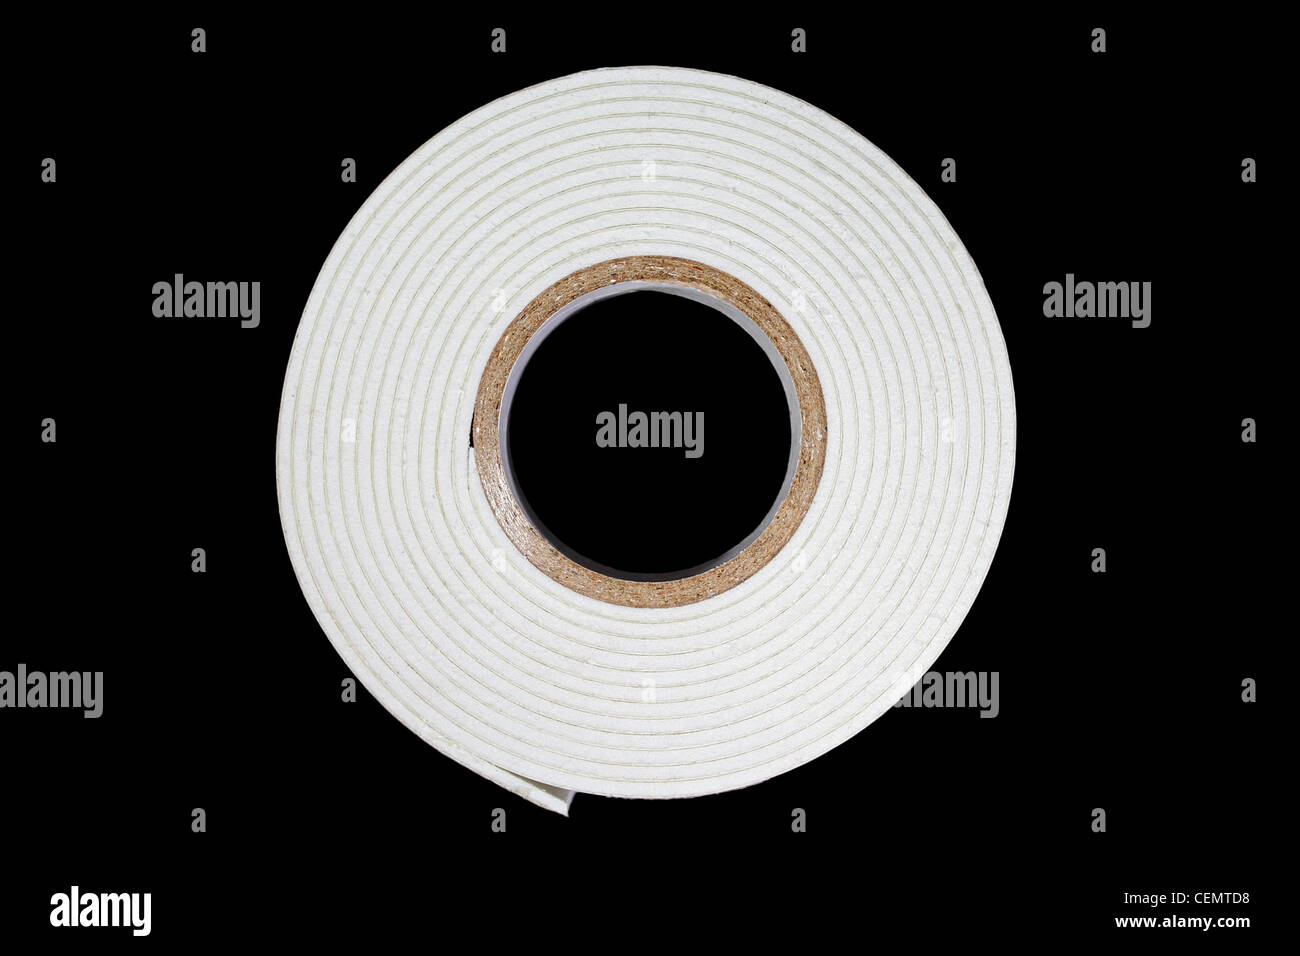 Double-sided self-adhesive tape Stock Photo